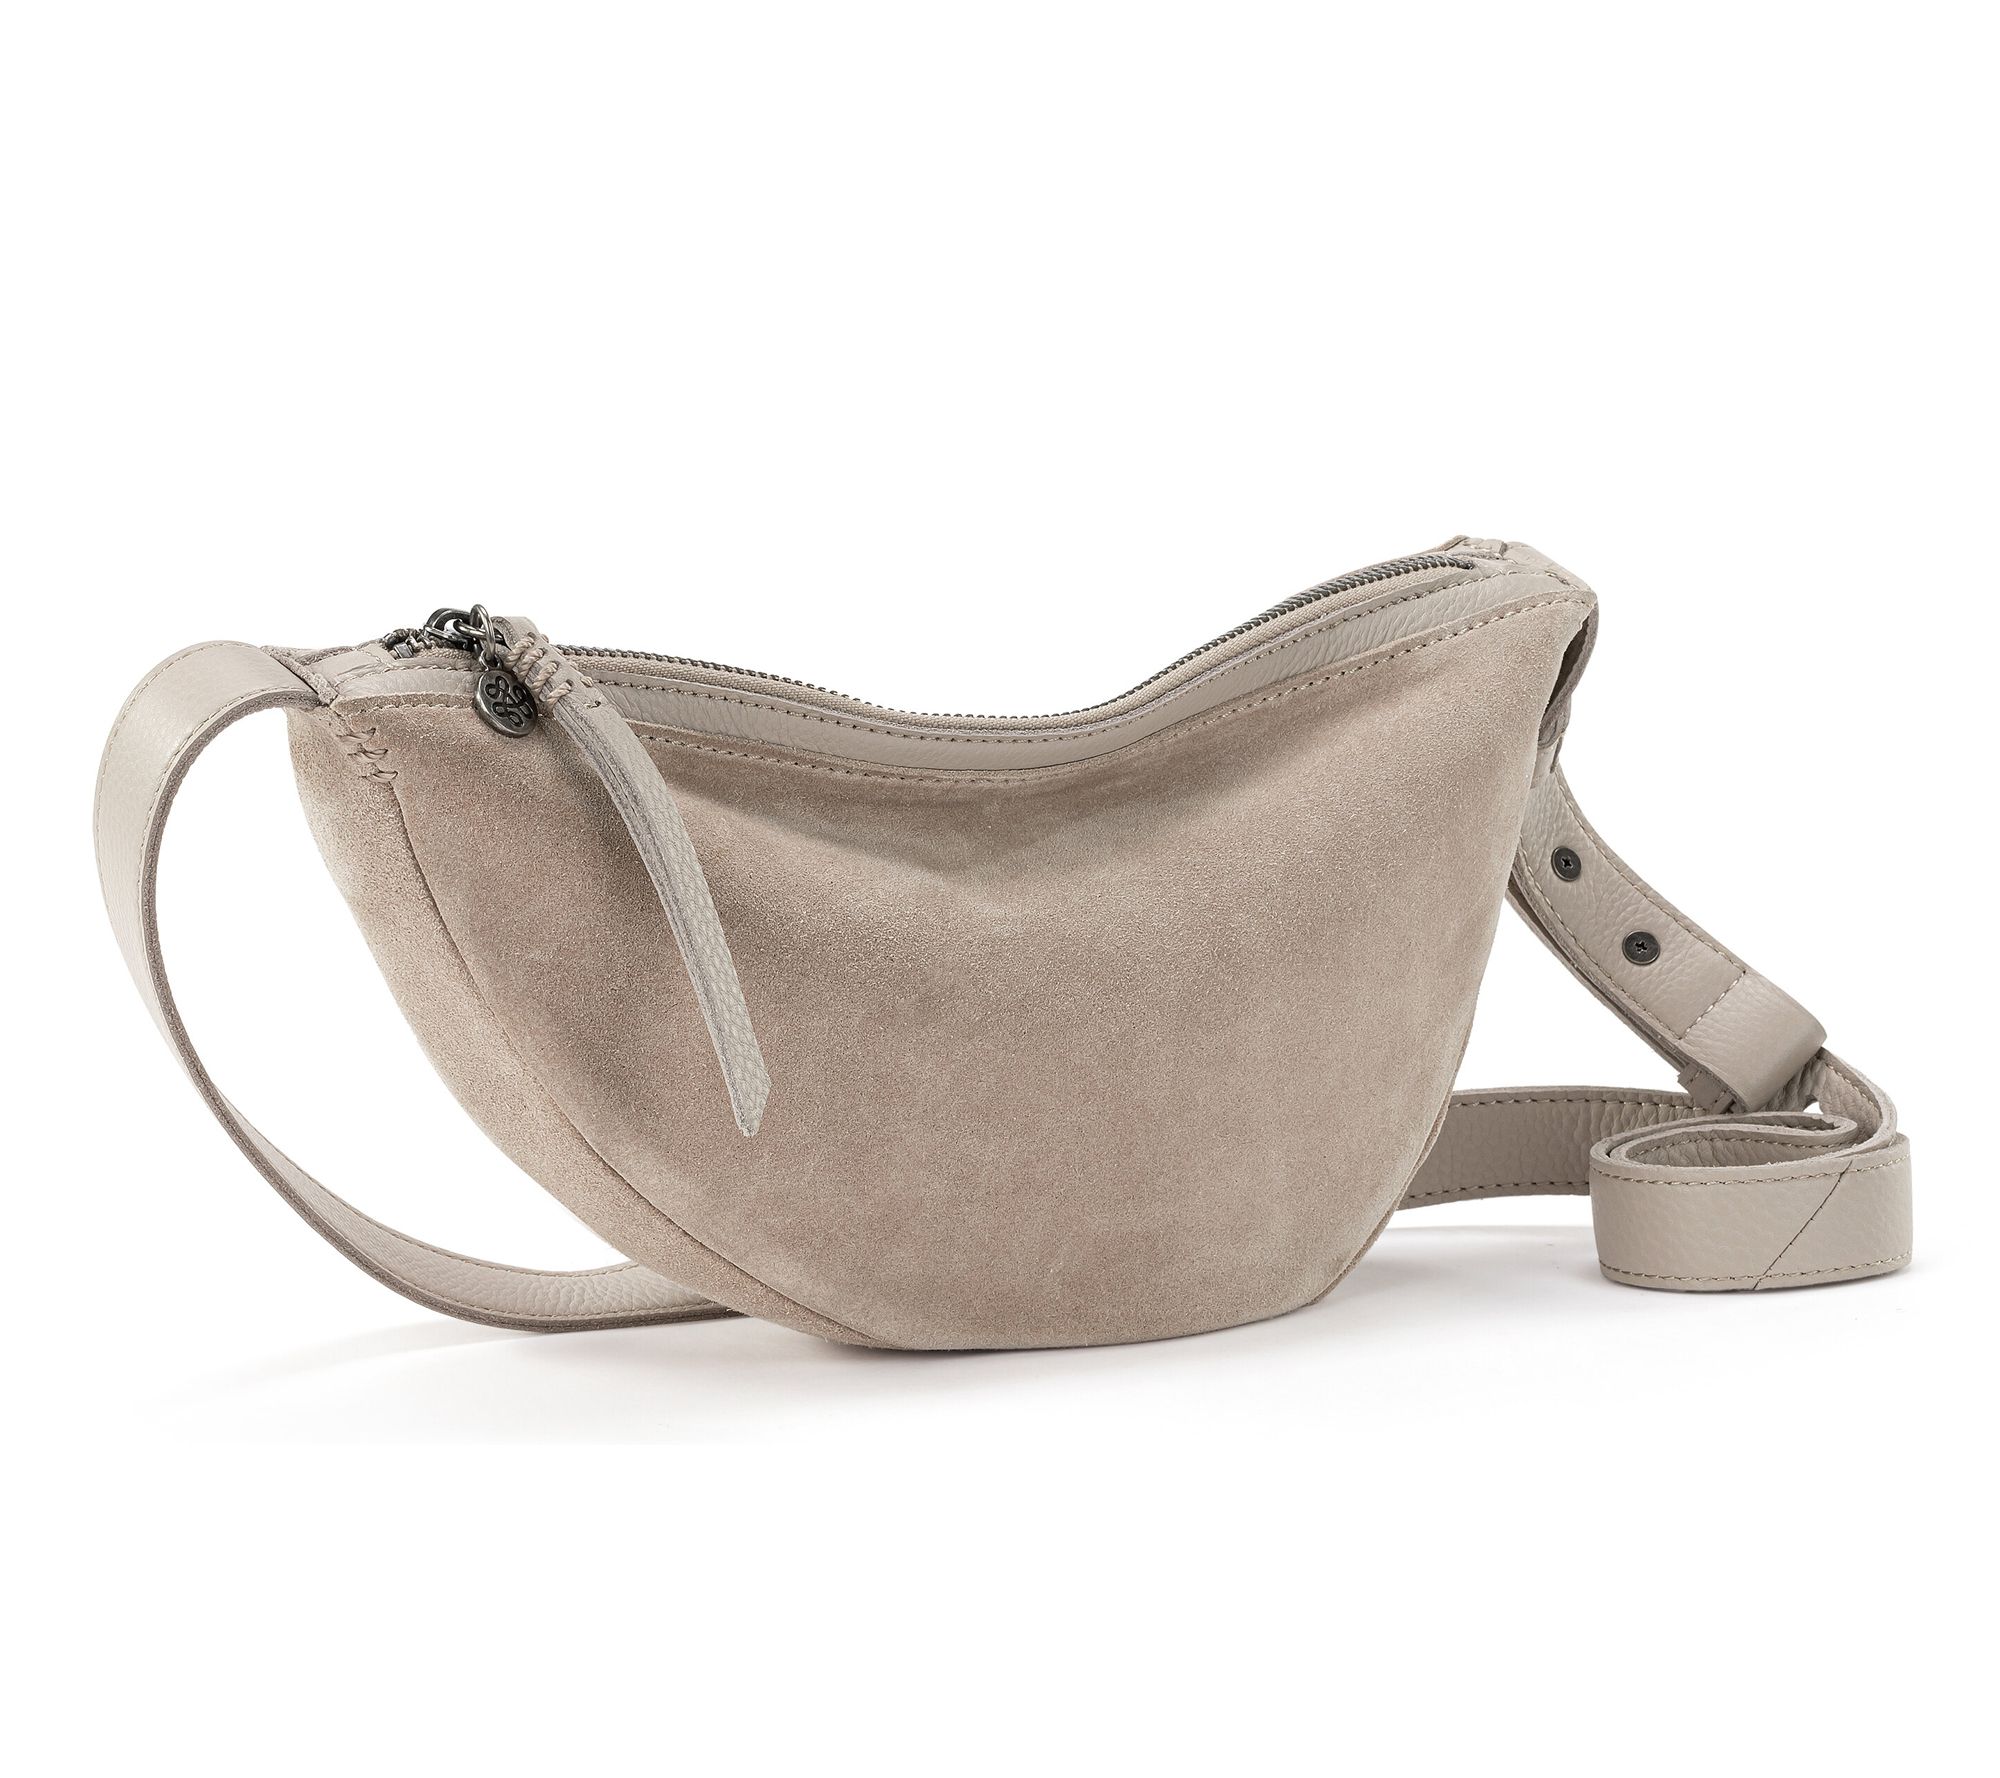 This Newly Released Sling Bag Is Already Trending on